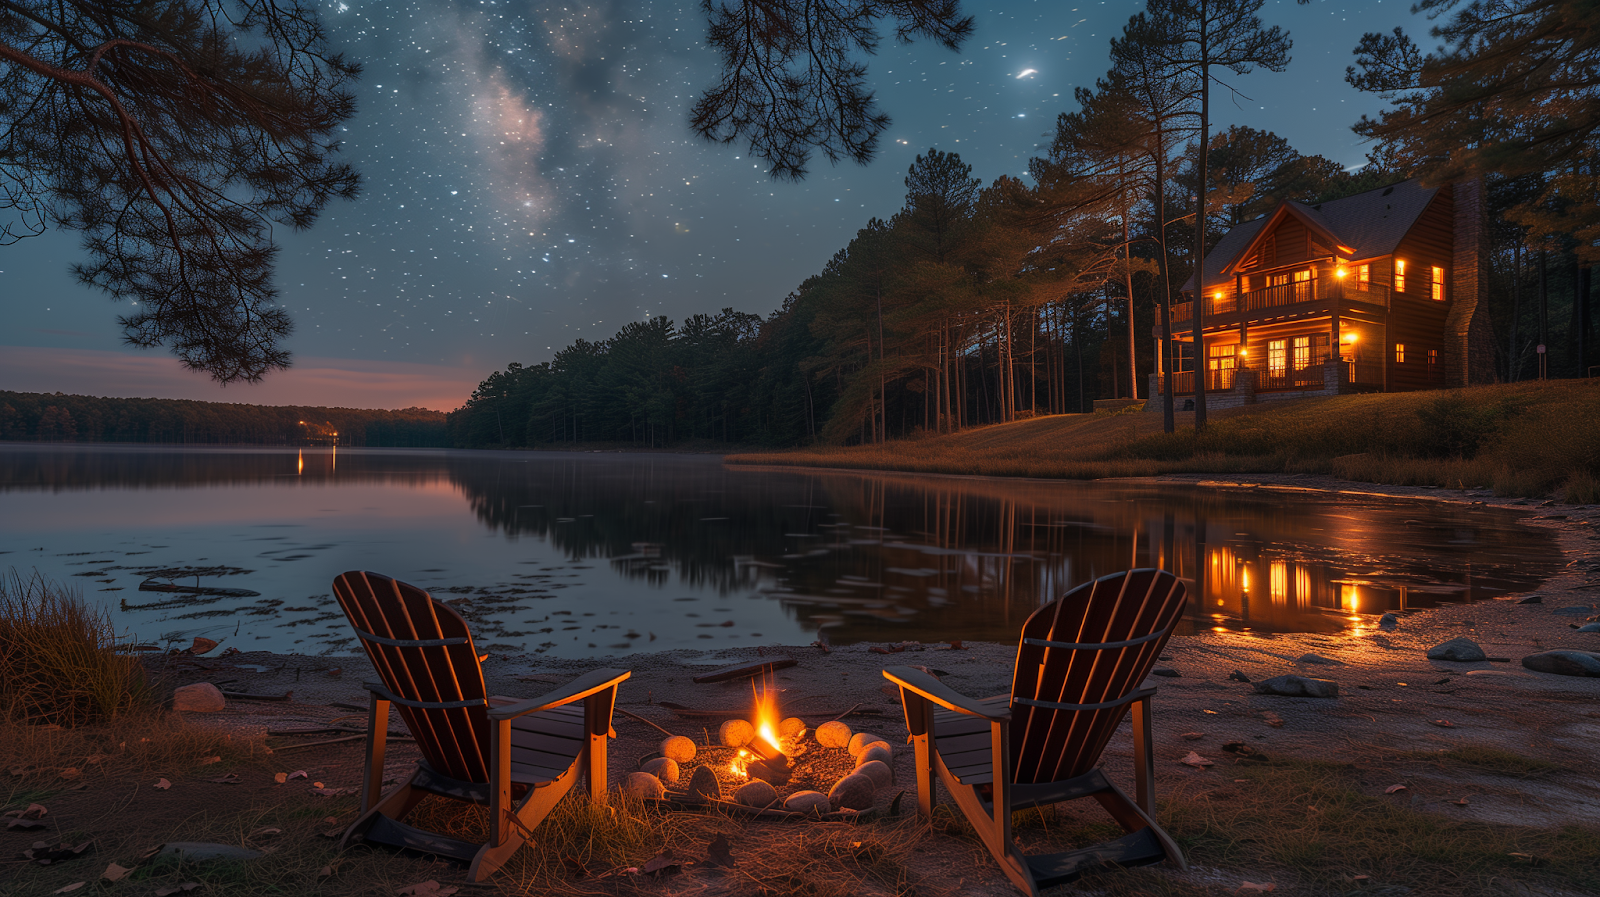 Stargazing adventures near a secluded cabin beside the lake.